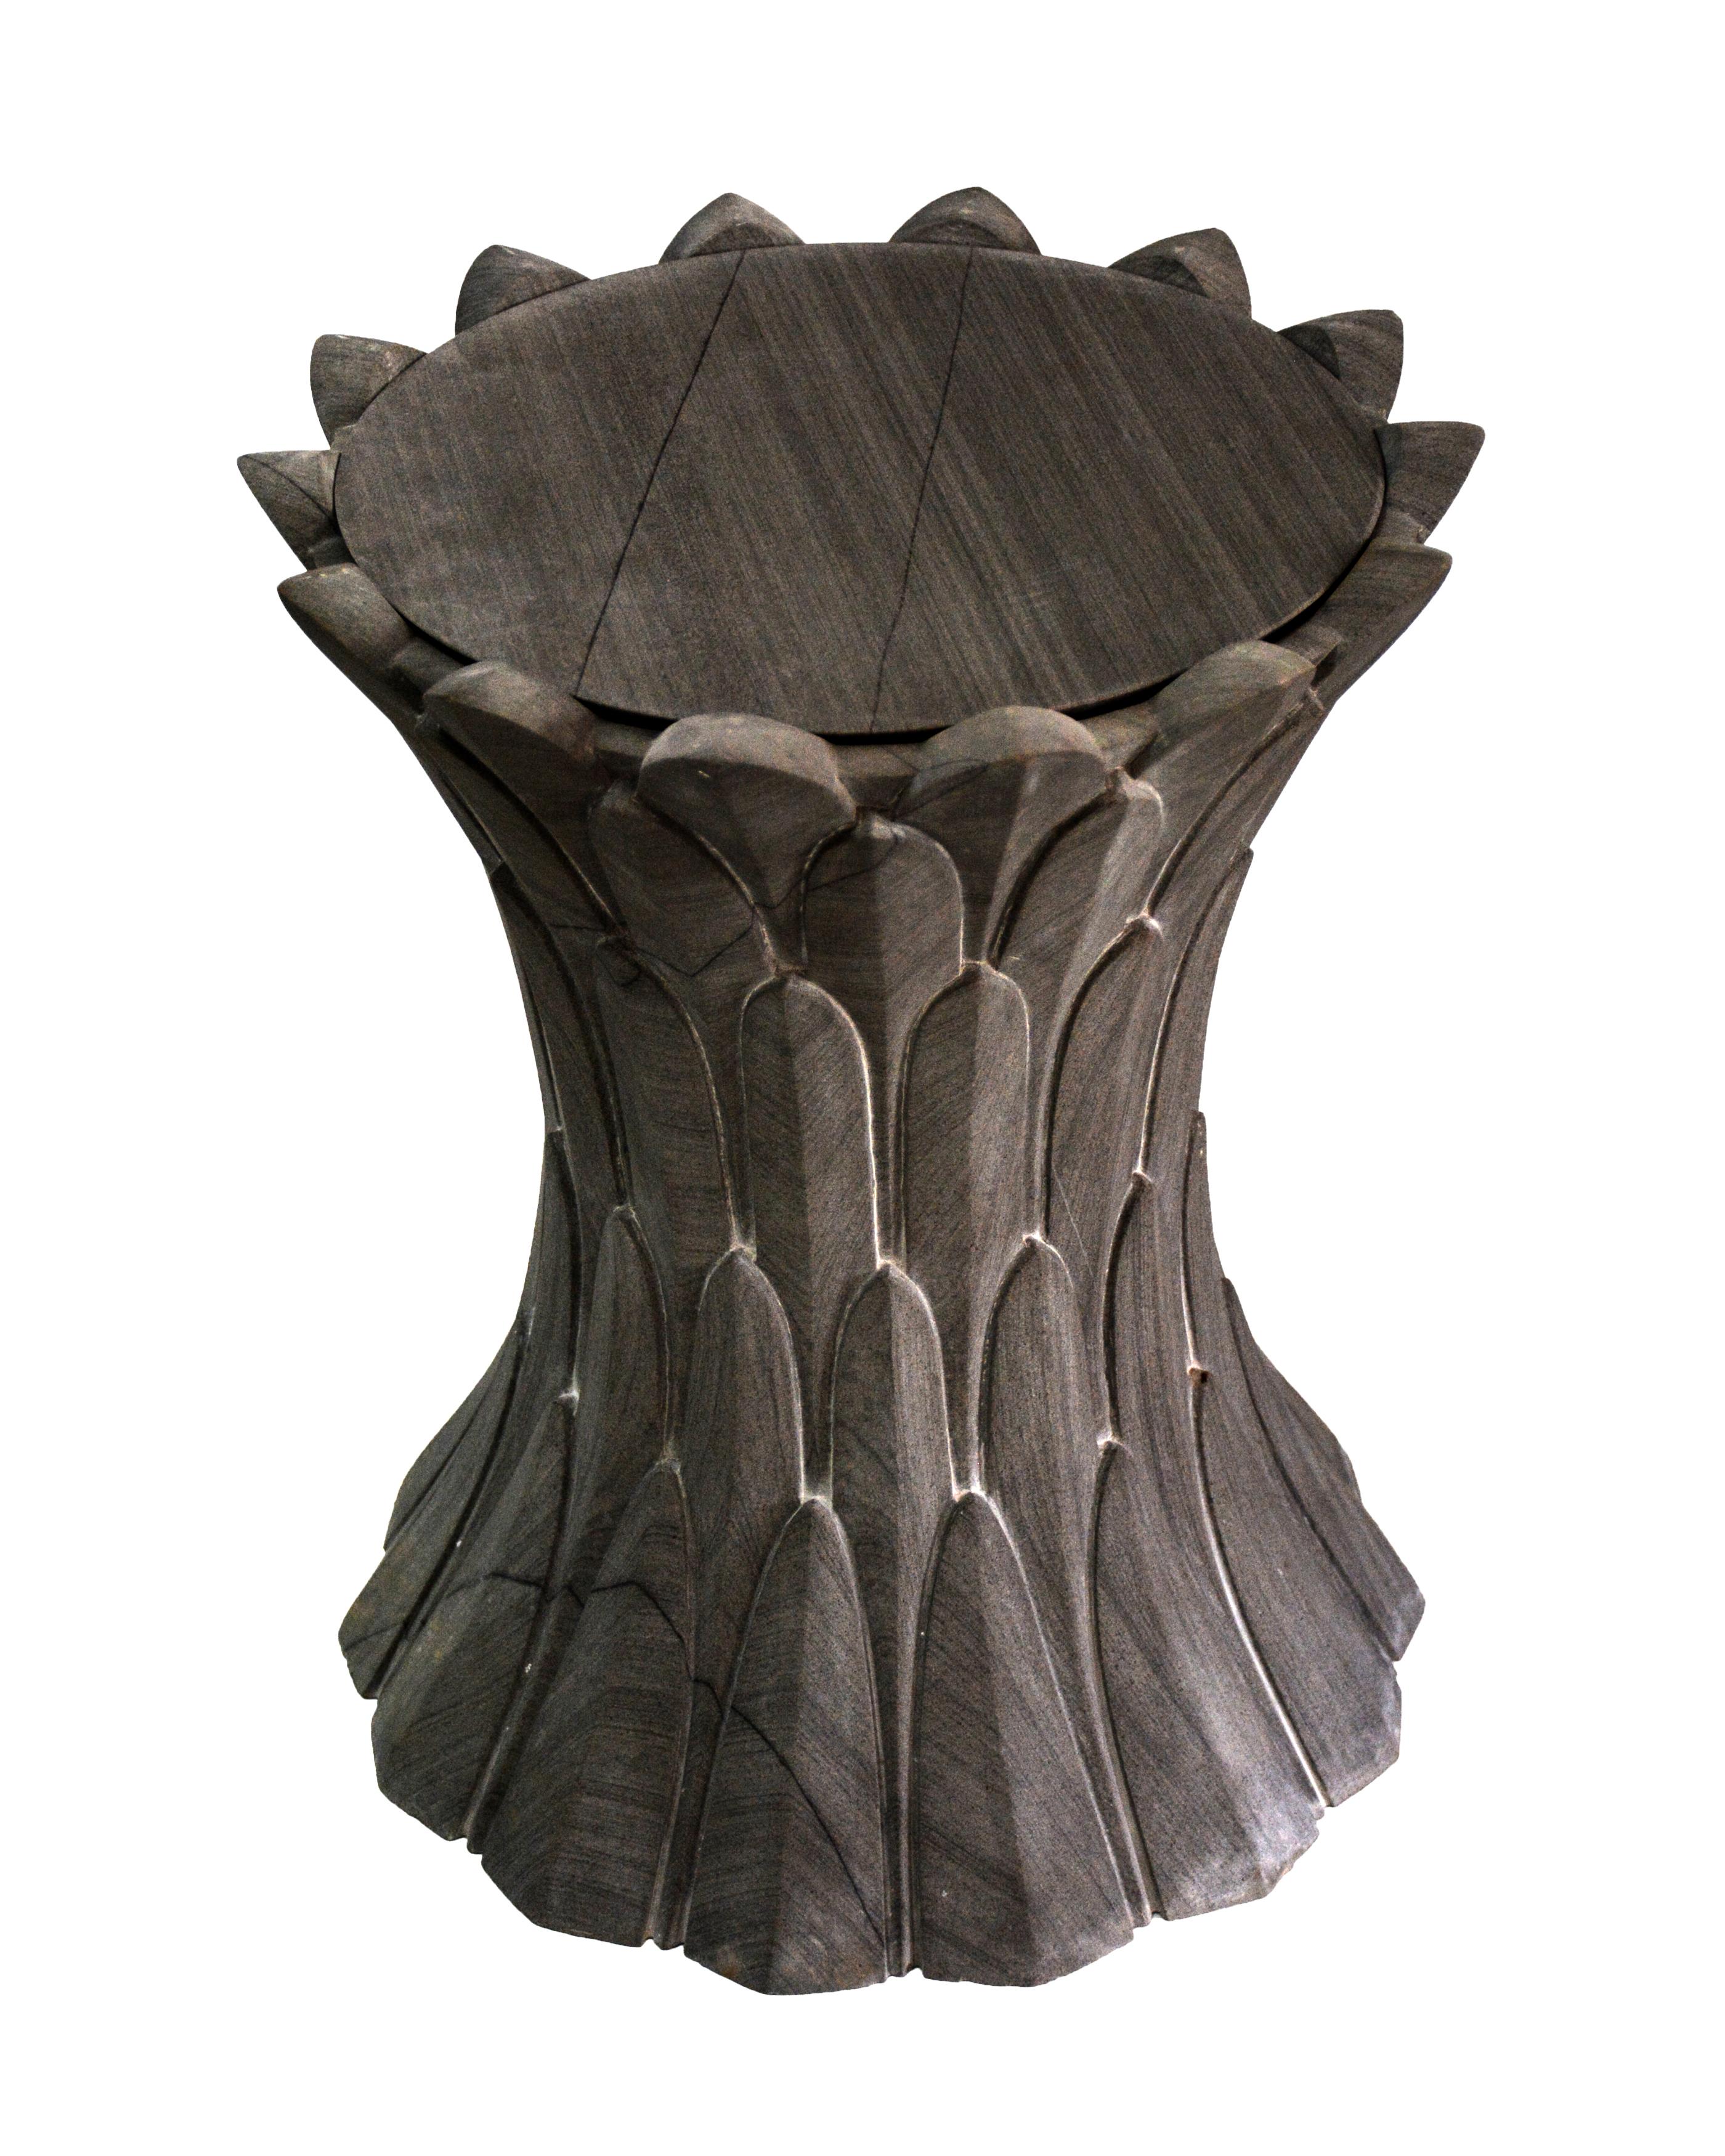 Contemporary Feathers Art Nouveau Side Table in Agra Grey Stone Designed by Stephanie Odegard For Sale